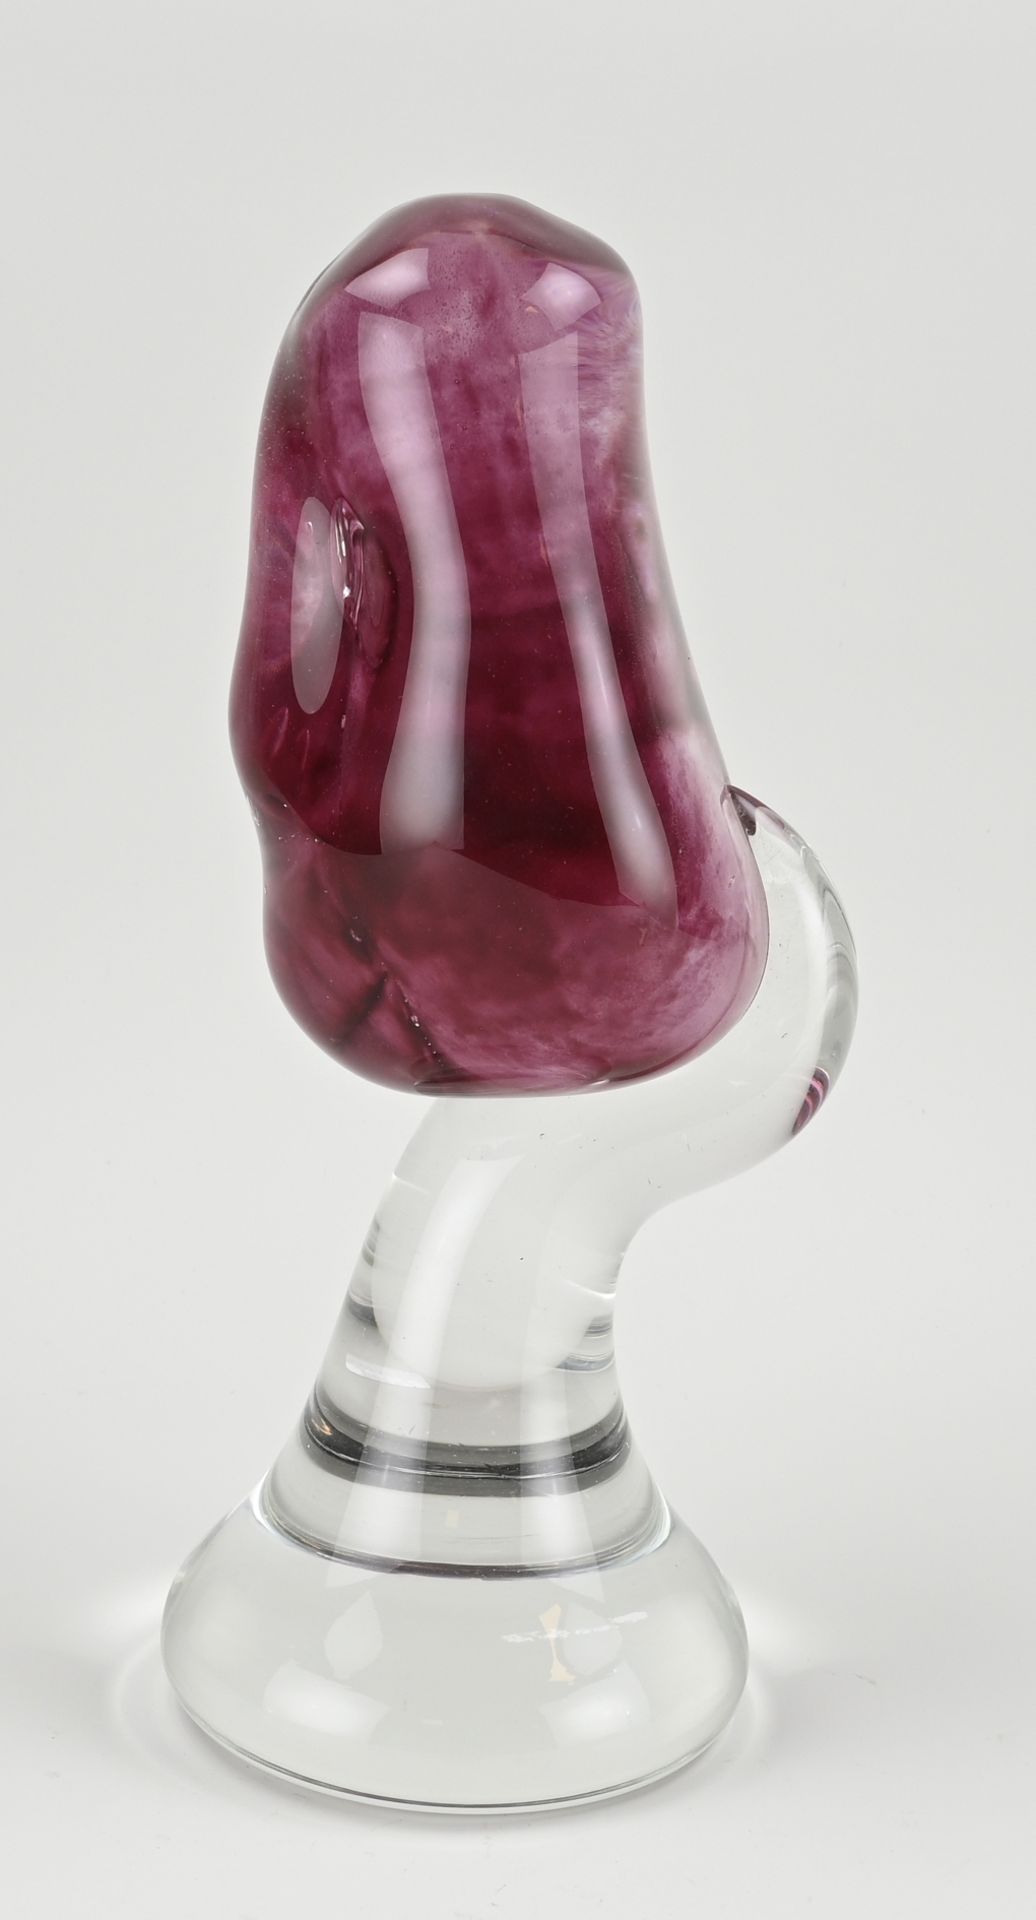 Glass sculpture by Rafal Rysz, H 37.5 cm. - Image 2 of 2